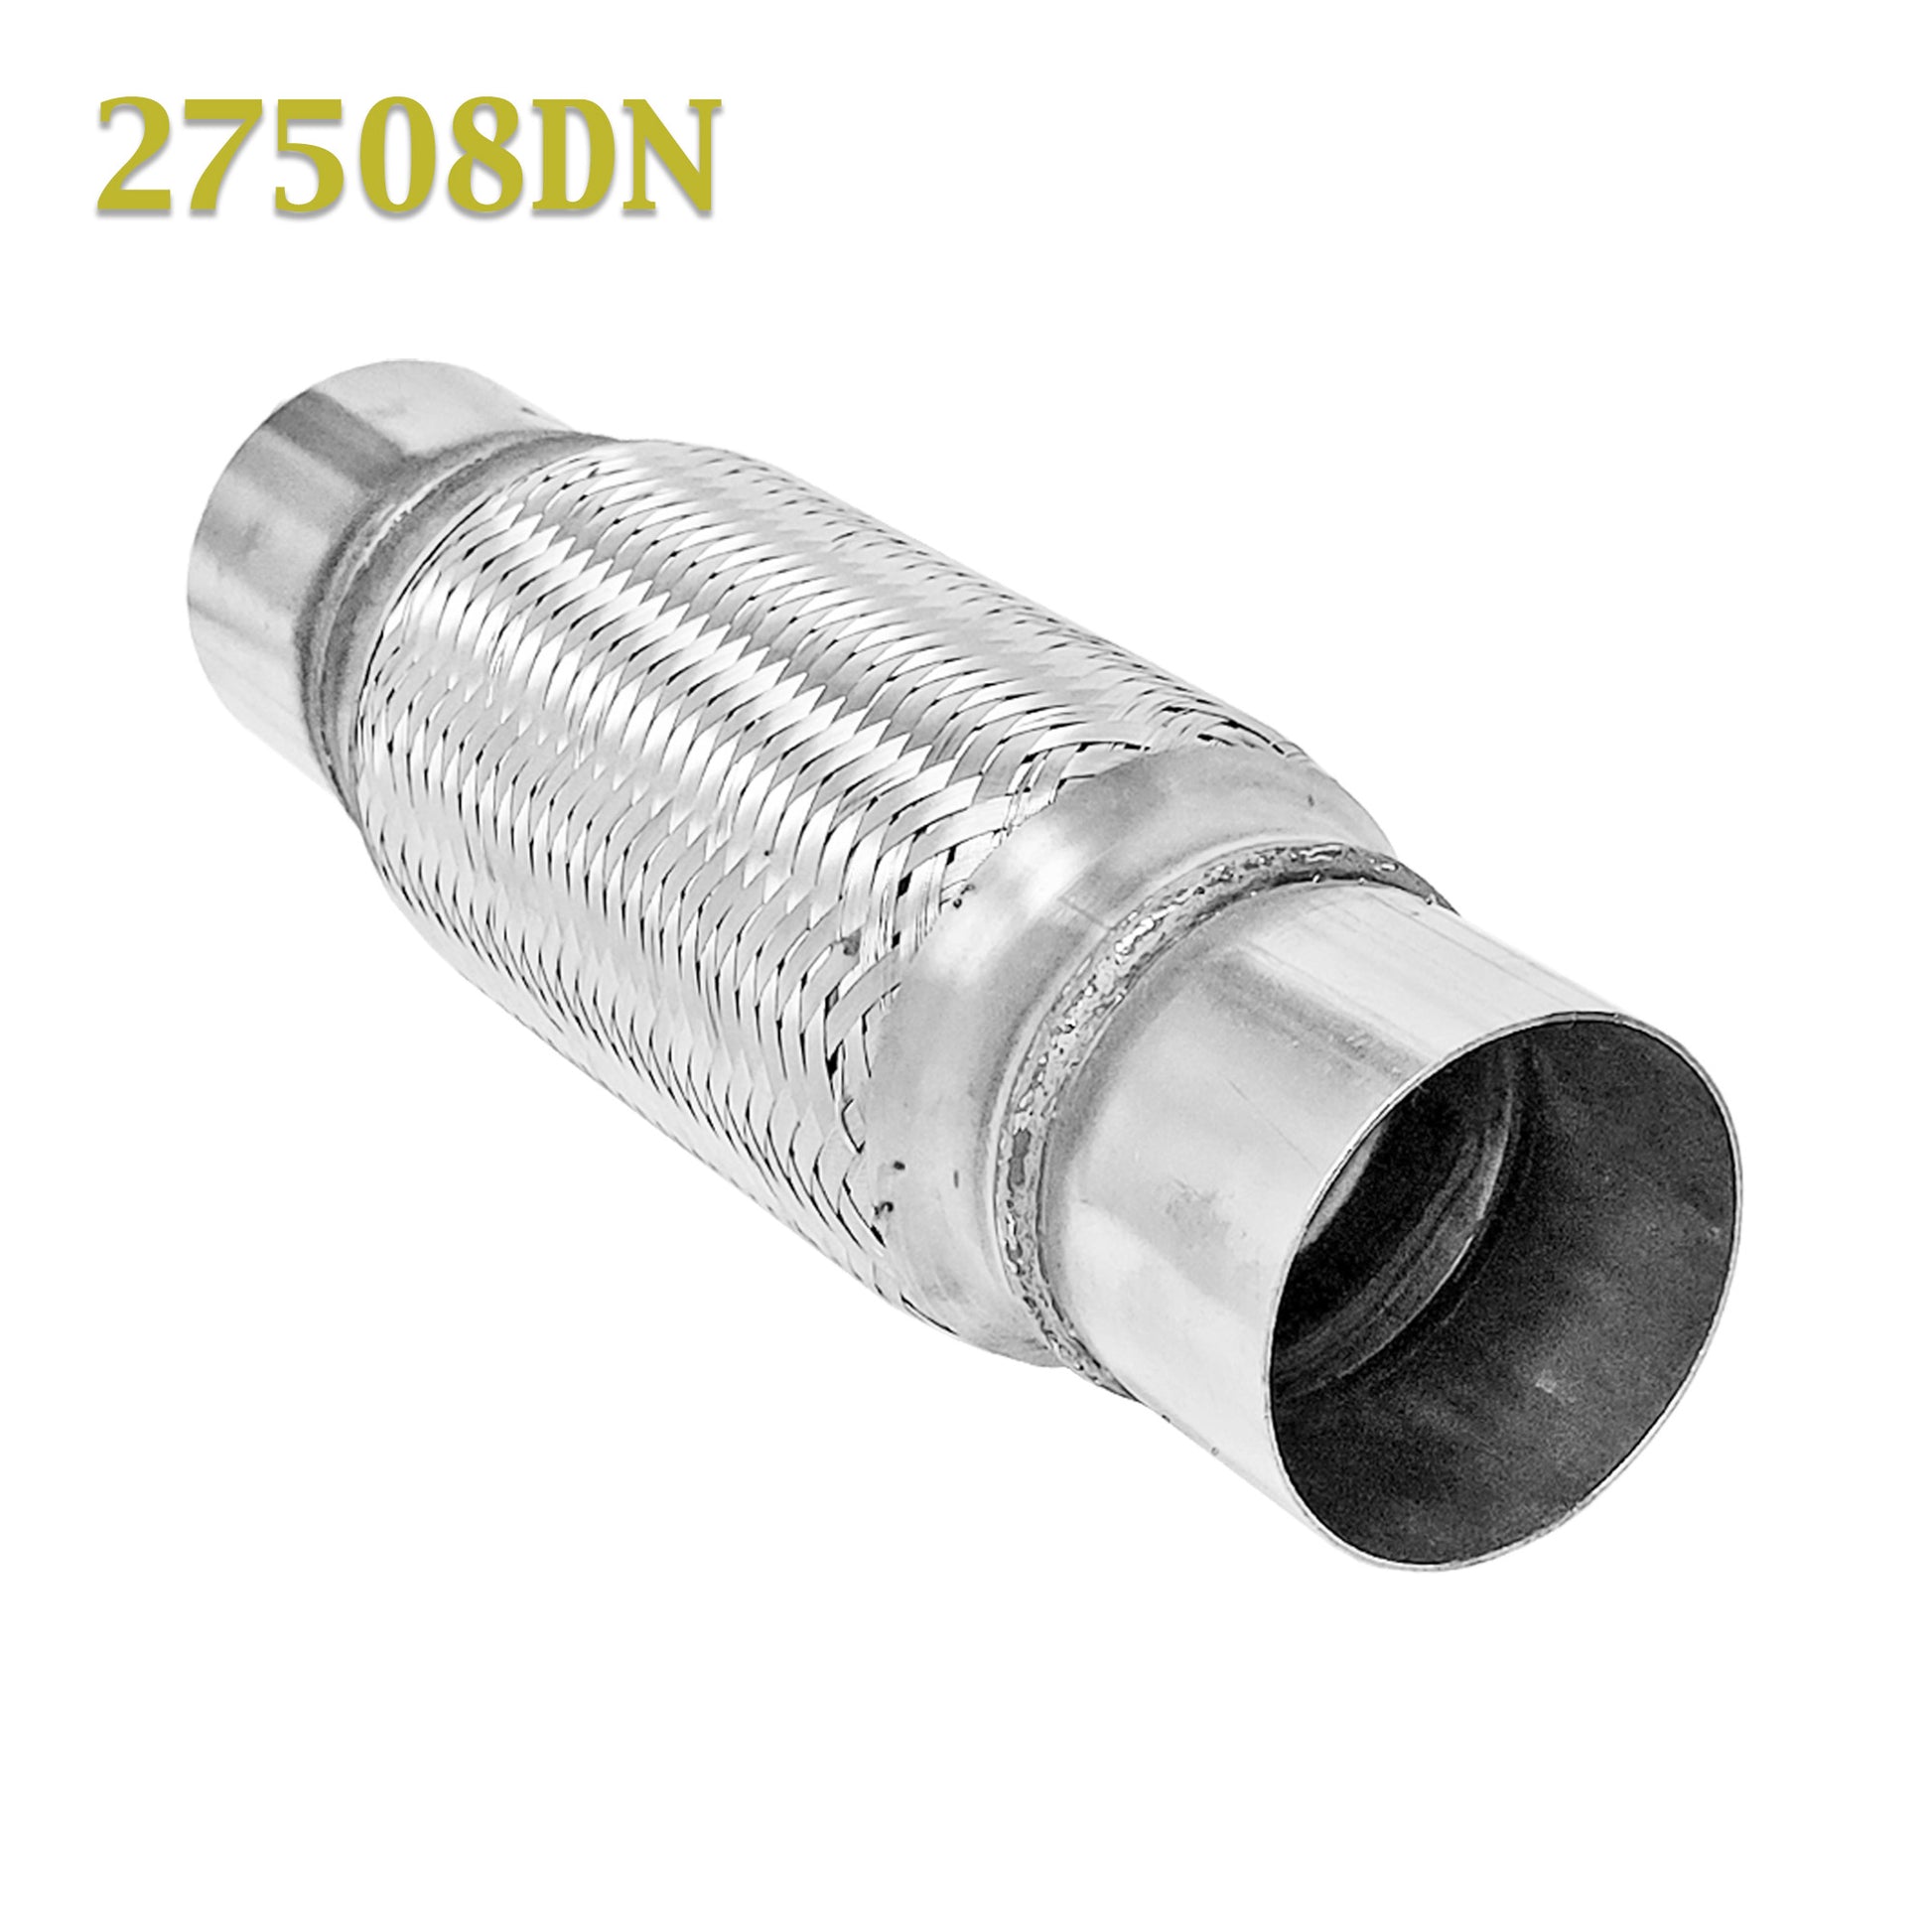 2.75 (2 3/4 in.) x 8 x 12 Flex Pipe Exhaust Coupling Stainless Heavy Duty